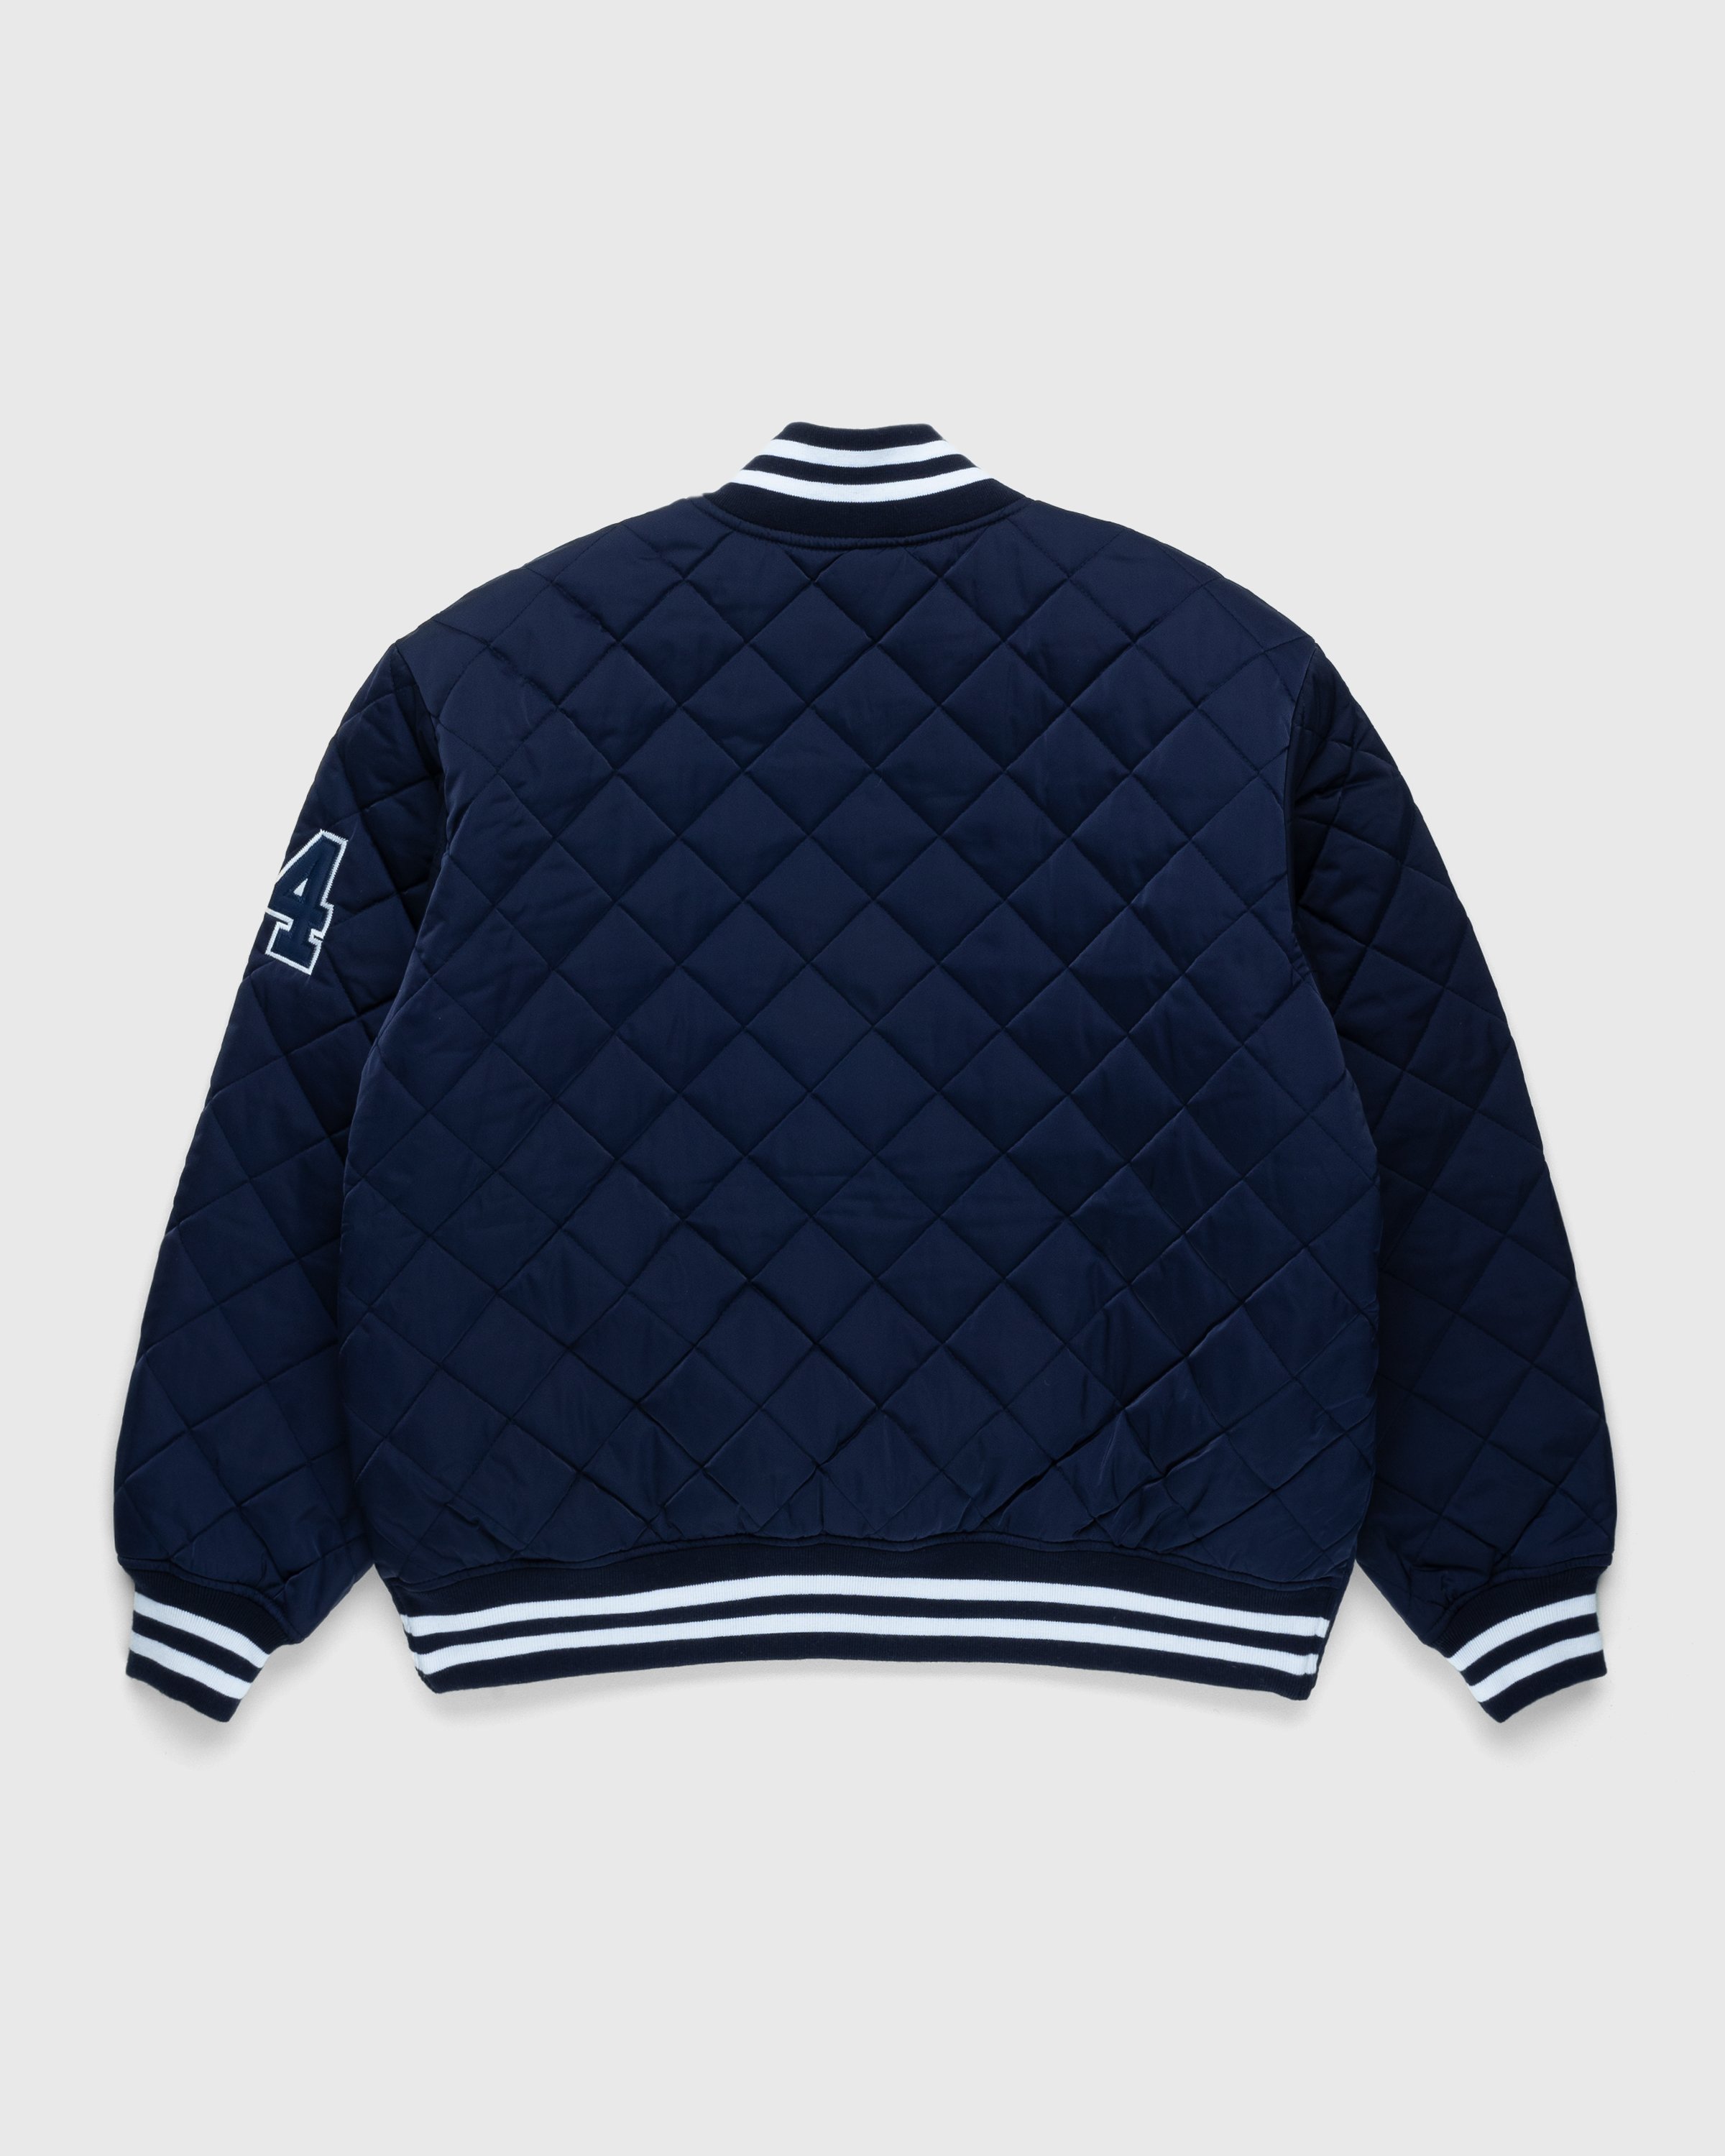 Patta - Diamond Quilted Sports Jacket Evening Blue - Clothing - Blue - Image 2